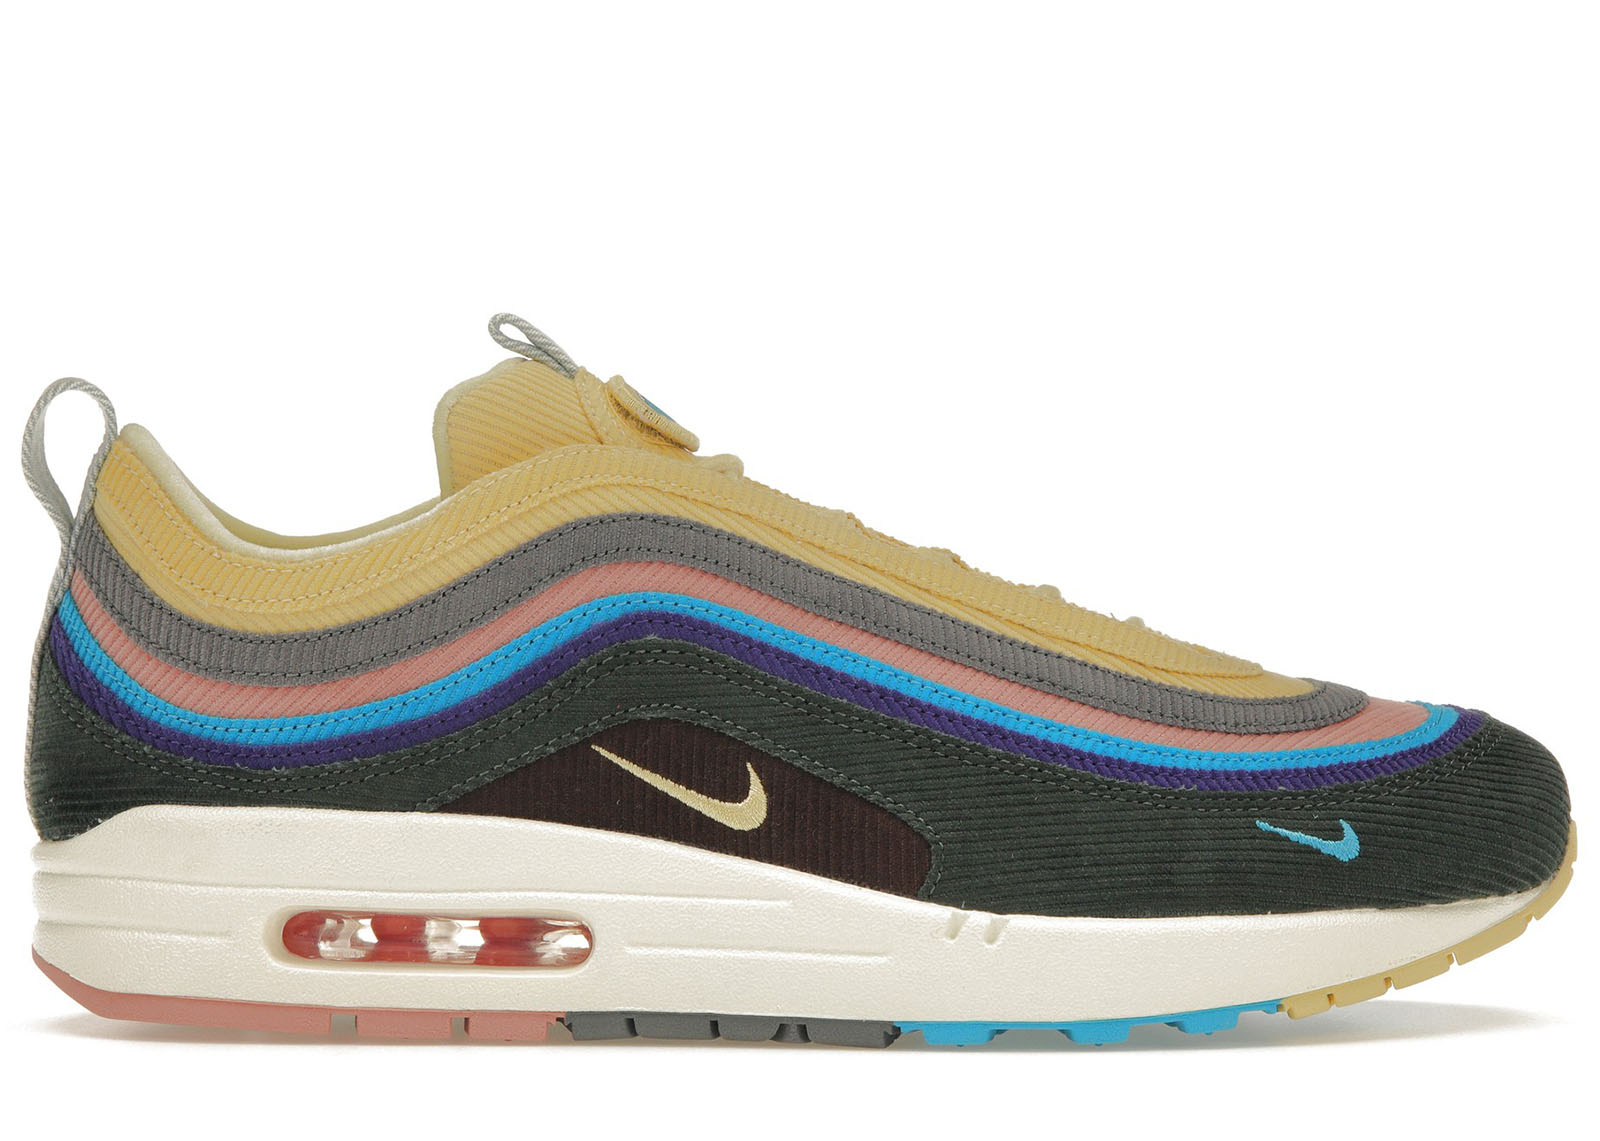 Nike Air Max 1/97 Sean Wotherspoon (Extra Lace Set Only) - AJ4219-400